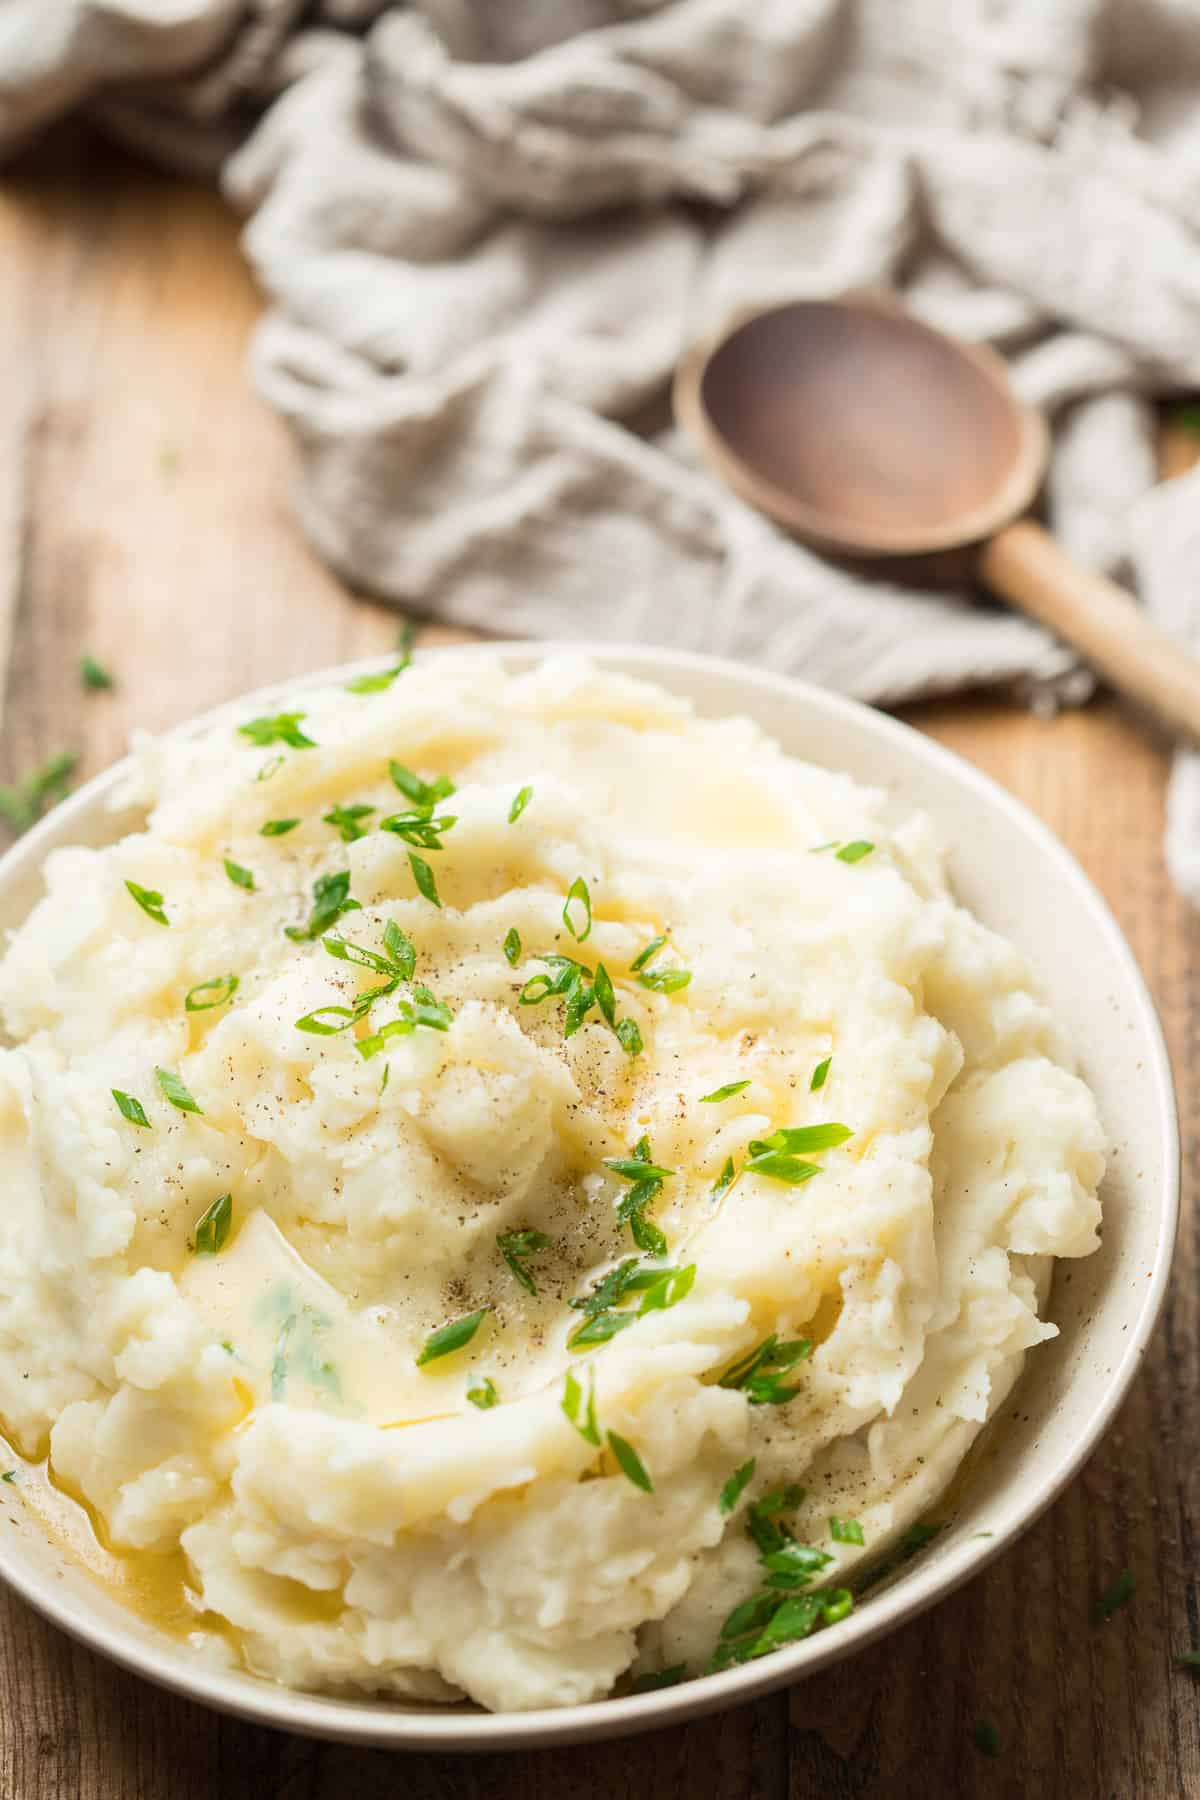 Bowl of Vegan Mashed Potatoes with Wooden Spoon in the Background.